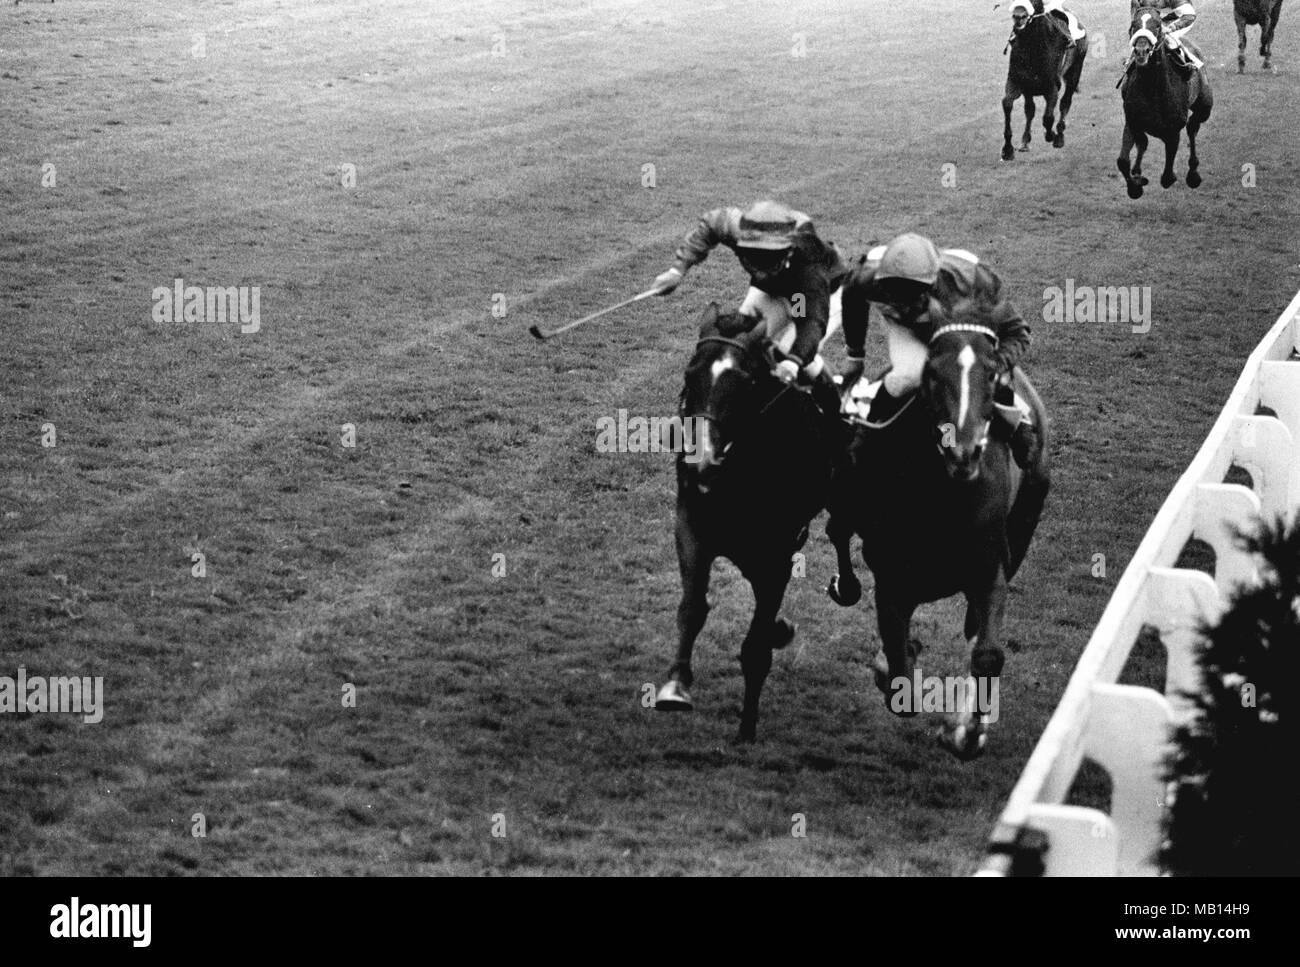 Joe Mercer on Le Moss (r) takes the Doncaster Cup at Doncaster Racecourse from Ardross, C. Roche up. The winning margin was a neck. Stock Photo